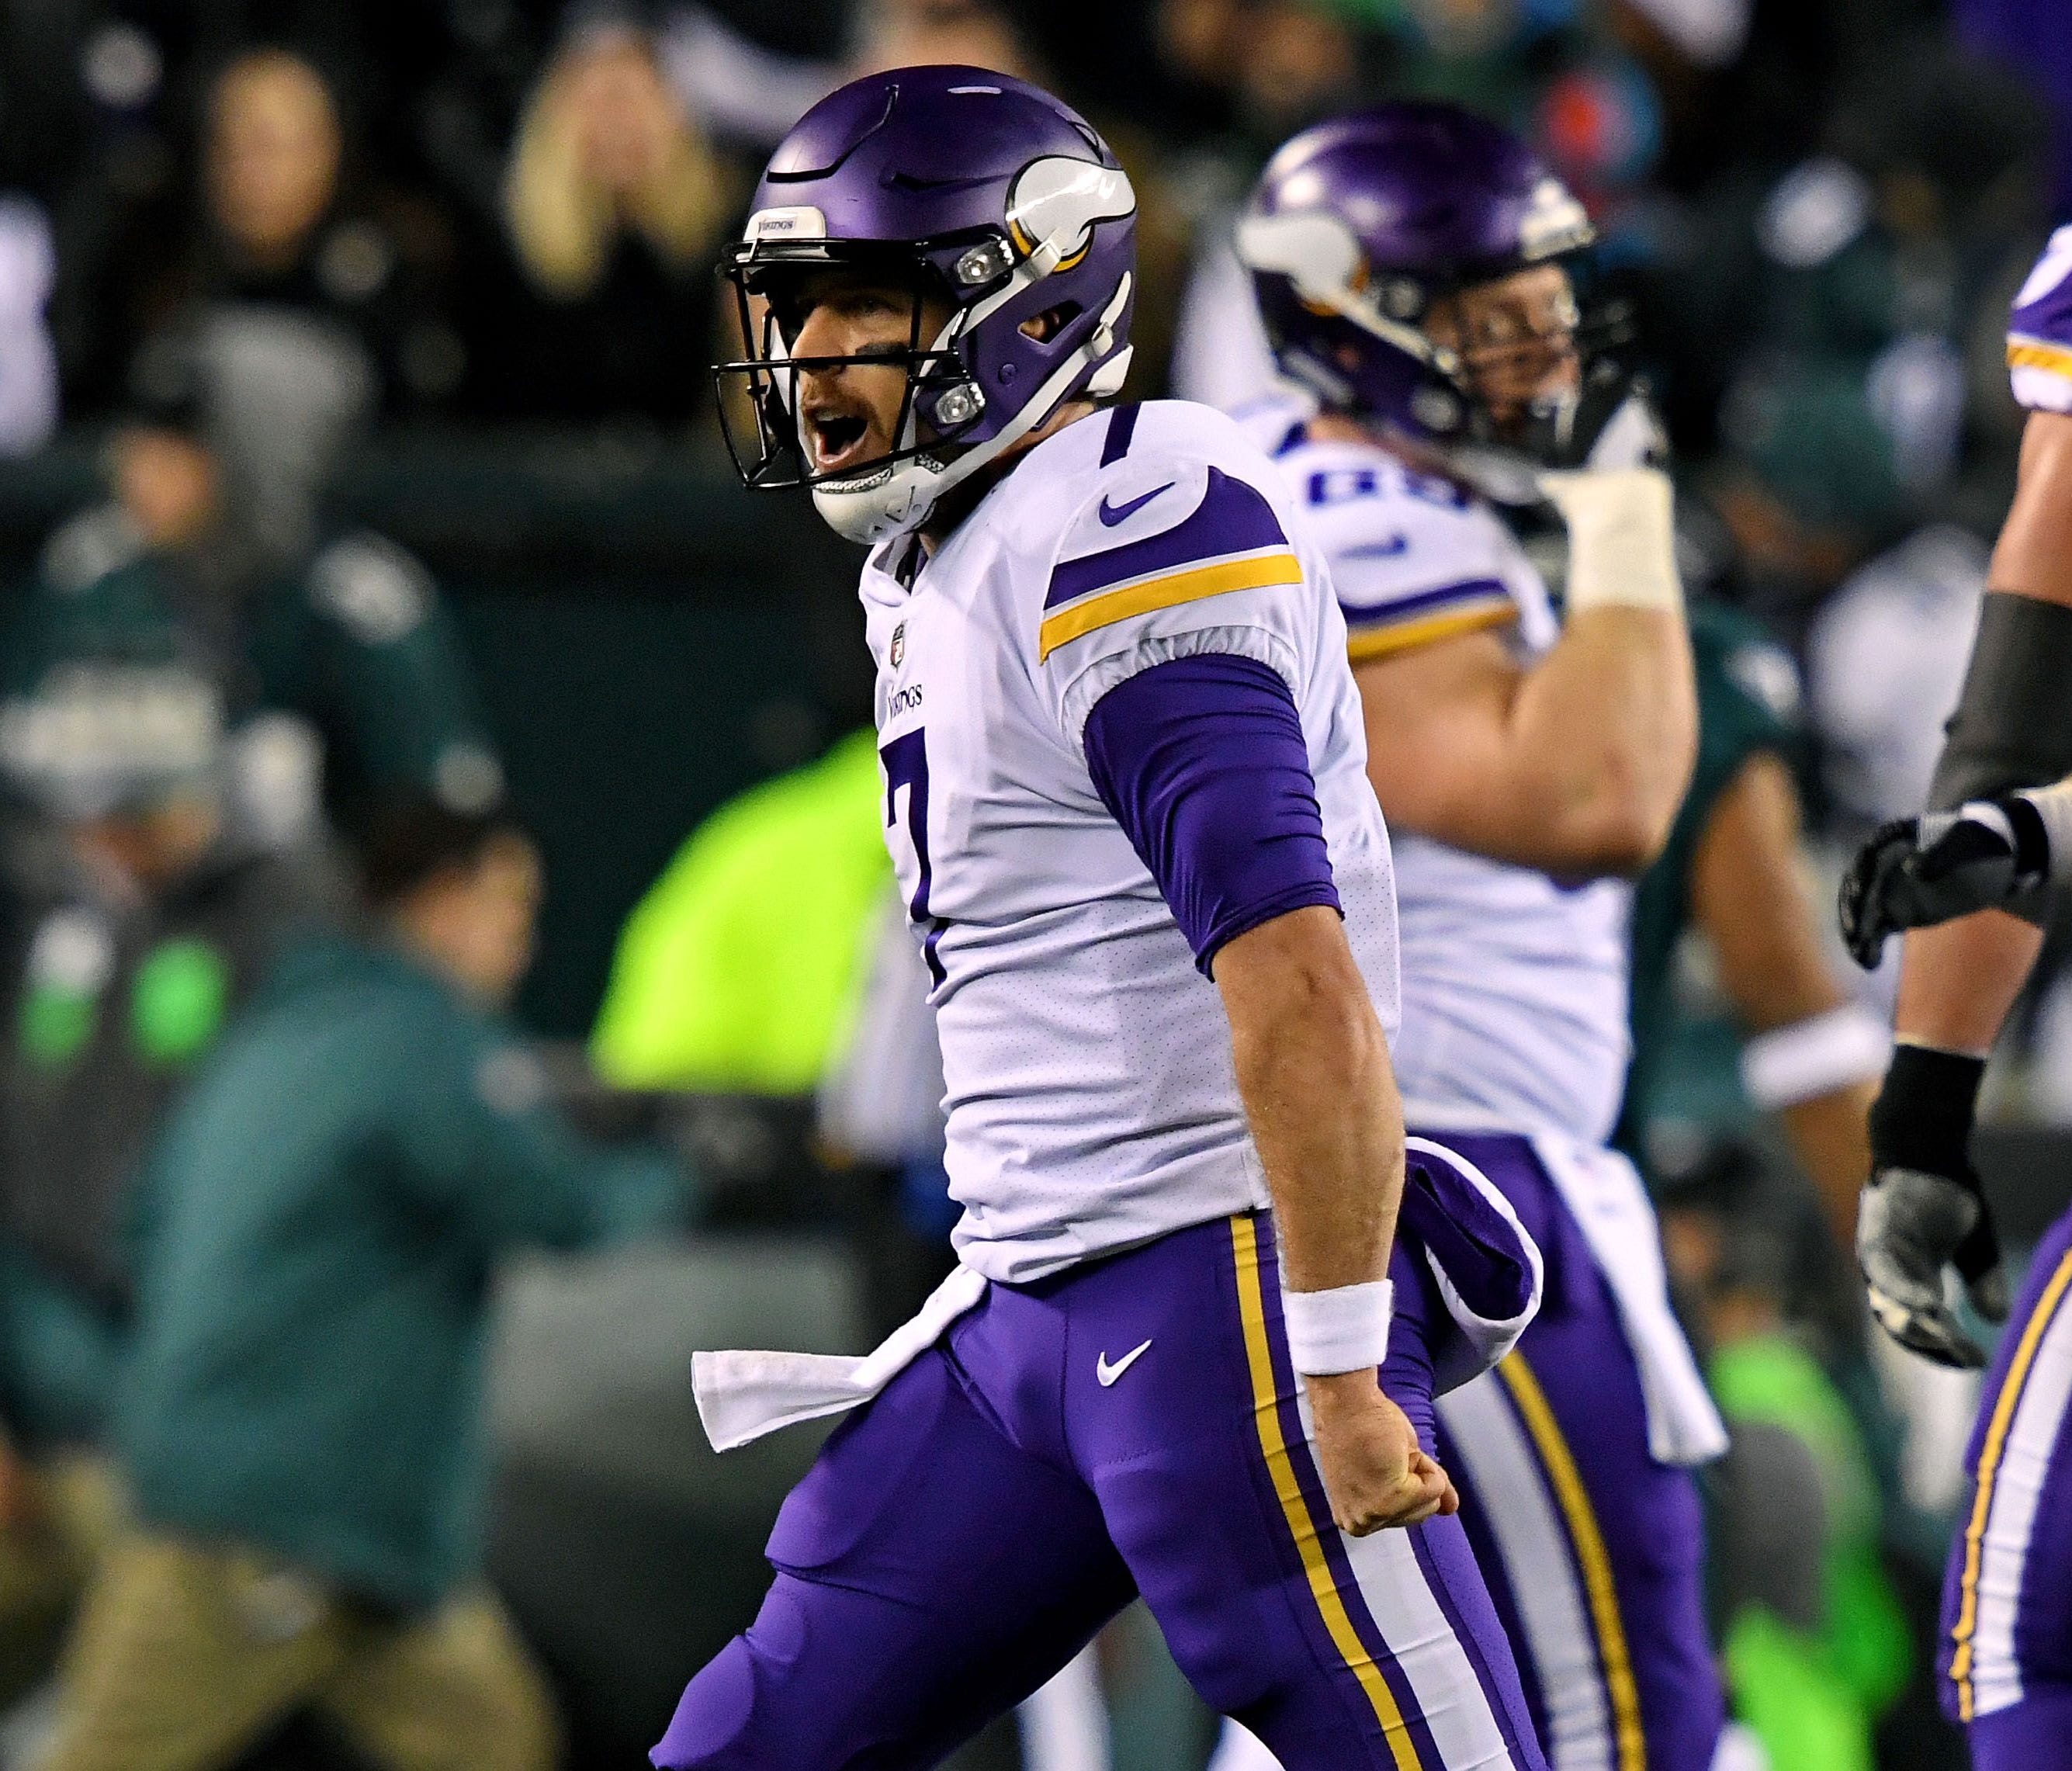 Minnesota Vikings quarterback Case Keenum (7) celebrates after throwing a touchdown  pass during the first quarter against the Philadelphia Eagles in the NFC Championship game at Lincoln Financial Field.